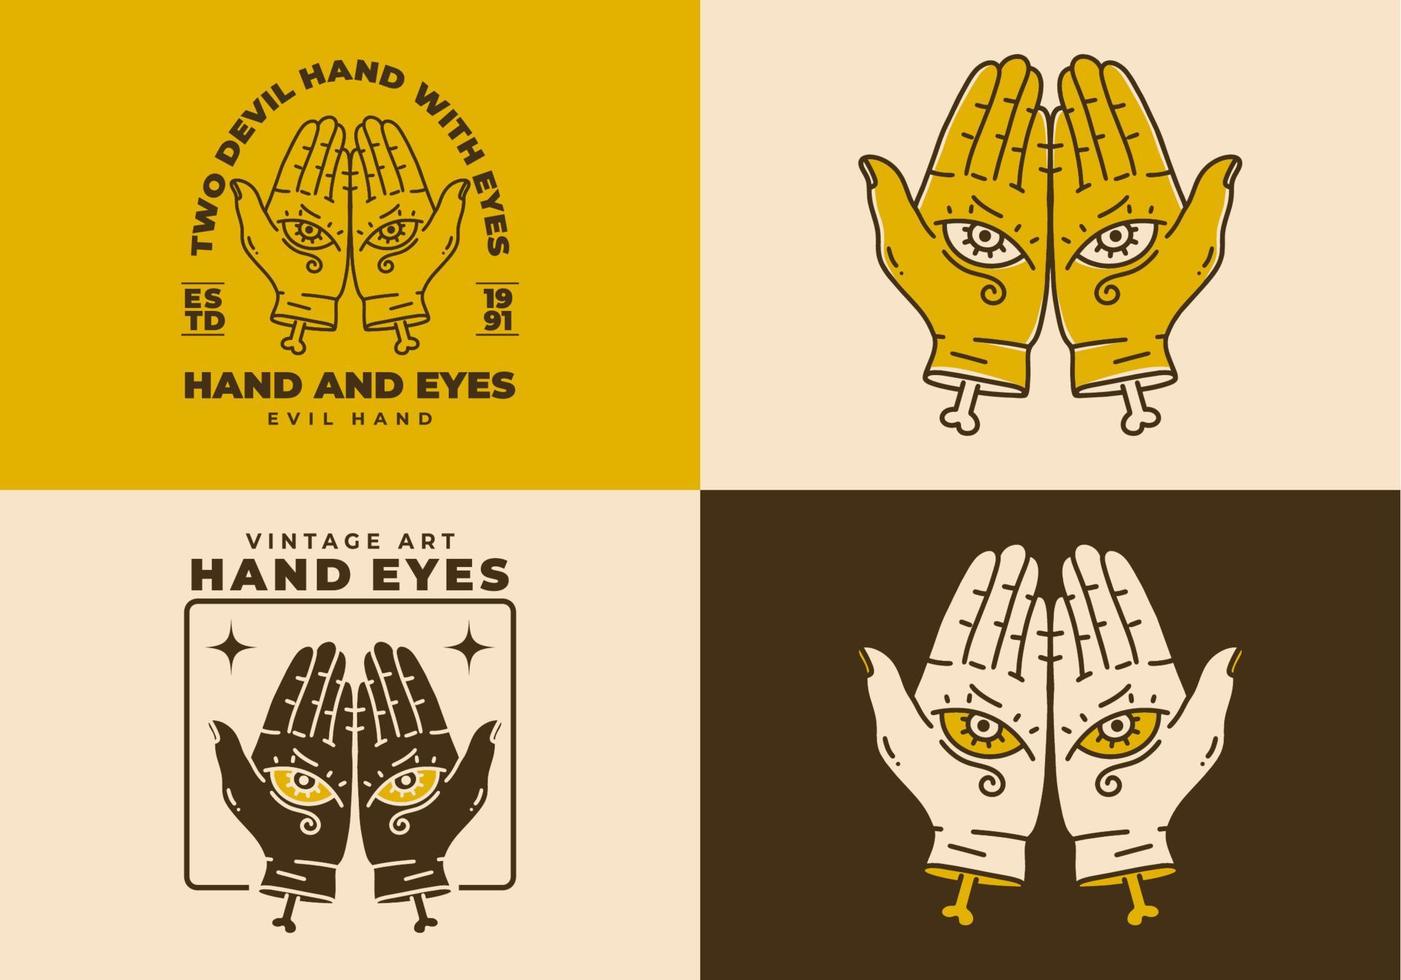 Vintage art illustration of two hand with eyes vector